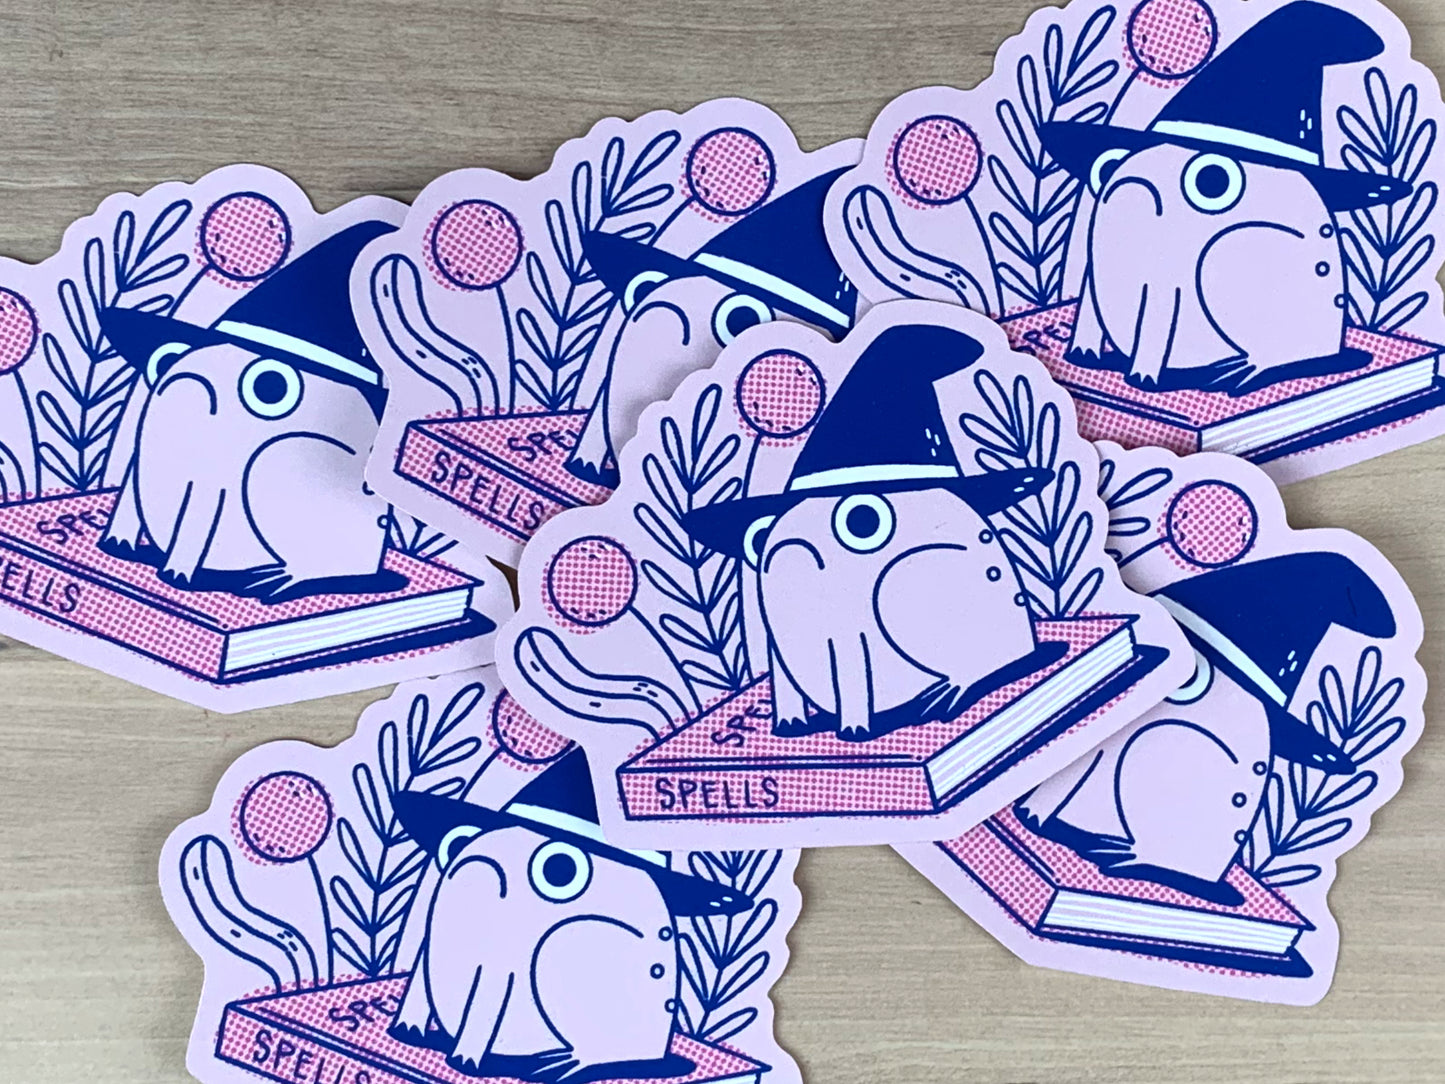 Stickers in pink and blue of a frog wearing a witches hat sitting on top of a book of spells.